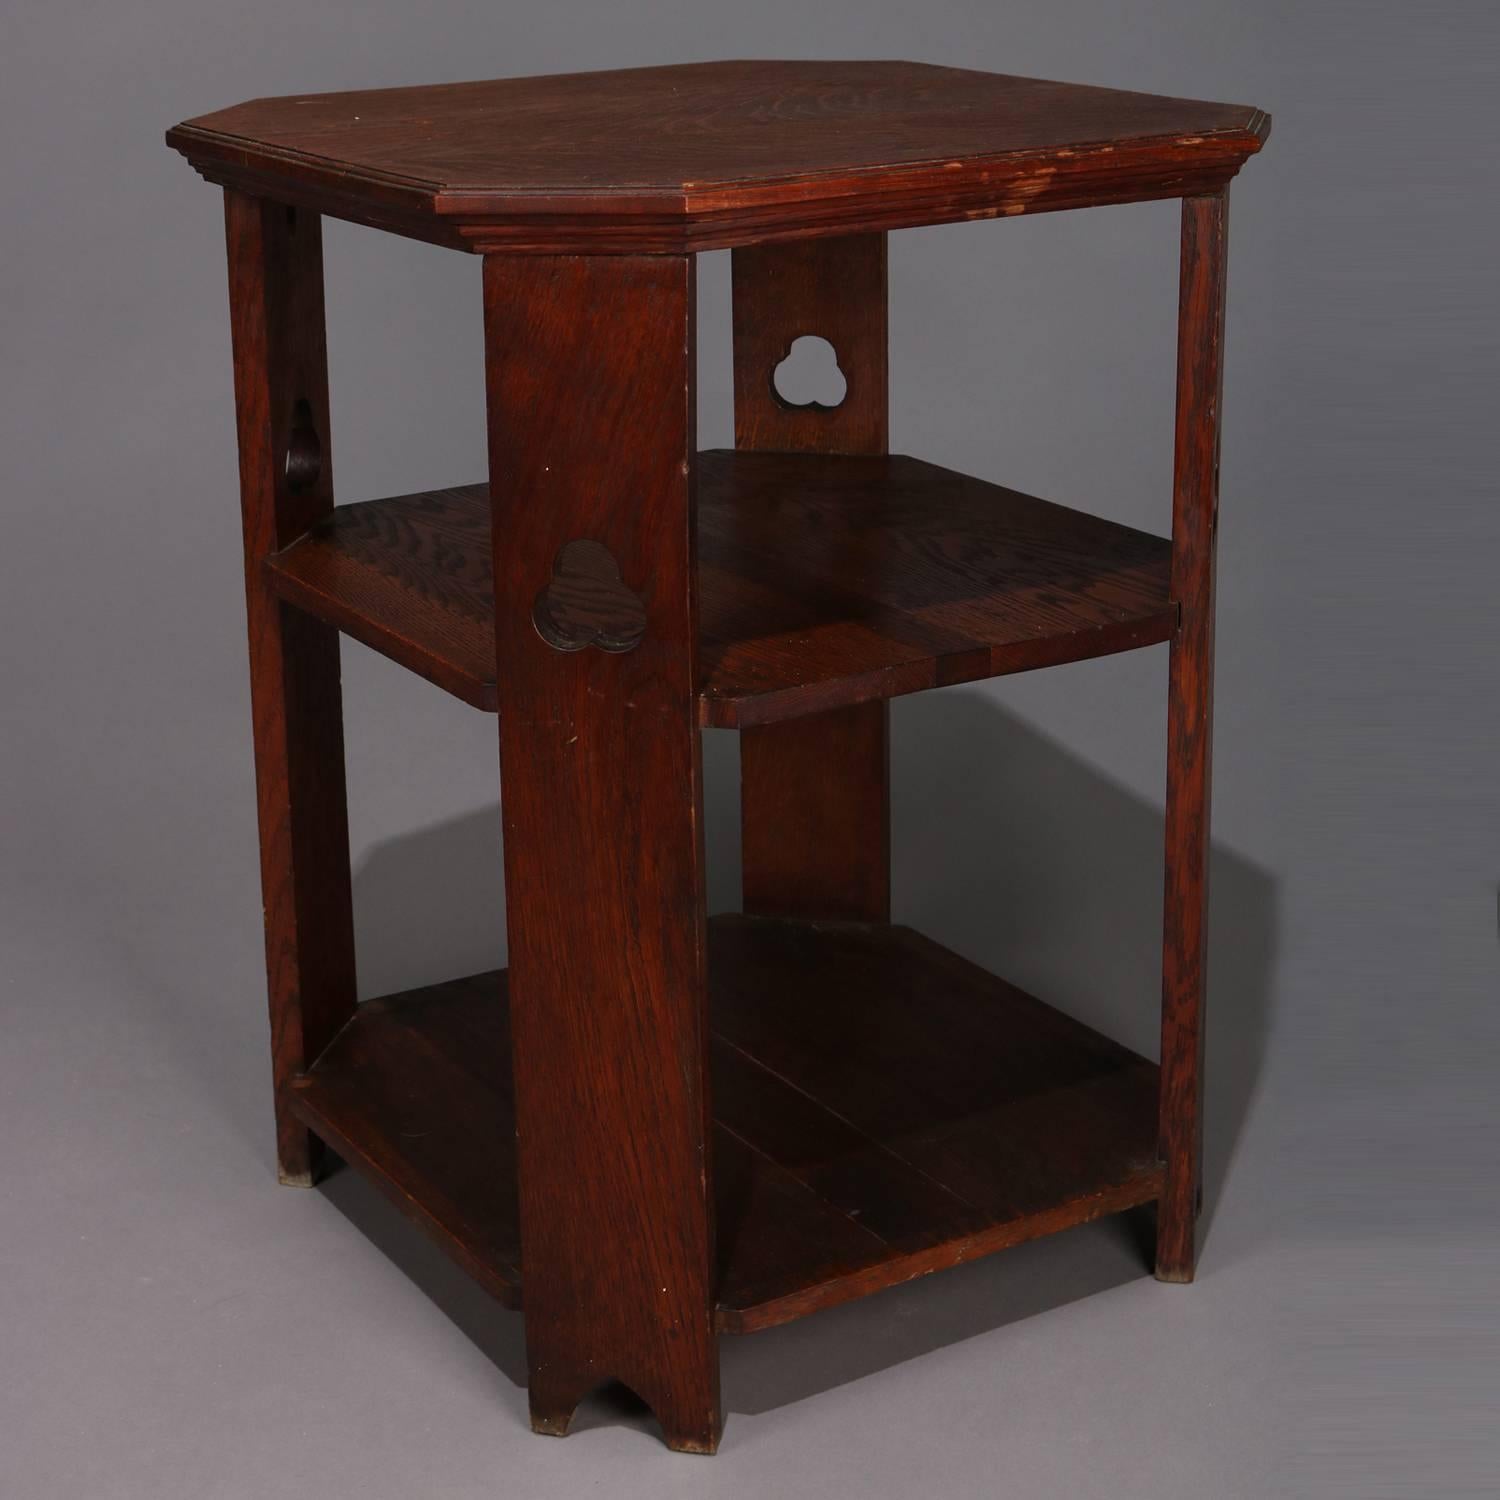 Antique Arts & Crafts Mission oak lamp or plant stand features quarter sawn oak construction with three tiers and cutout trefoils in legs, circa 1910

Measures: 27.5